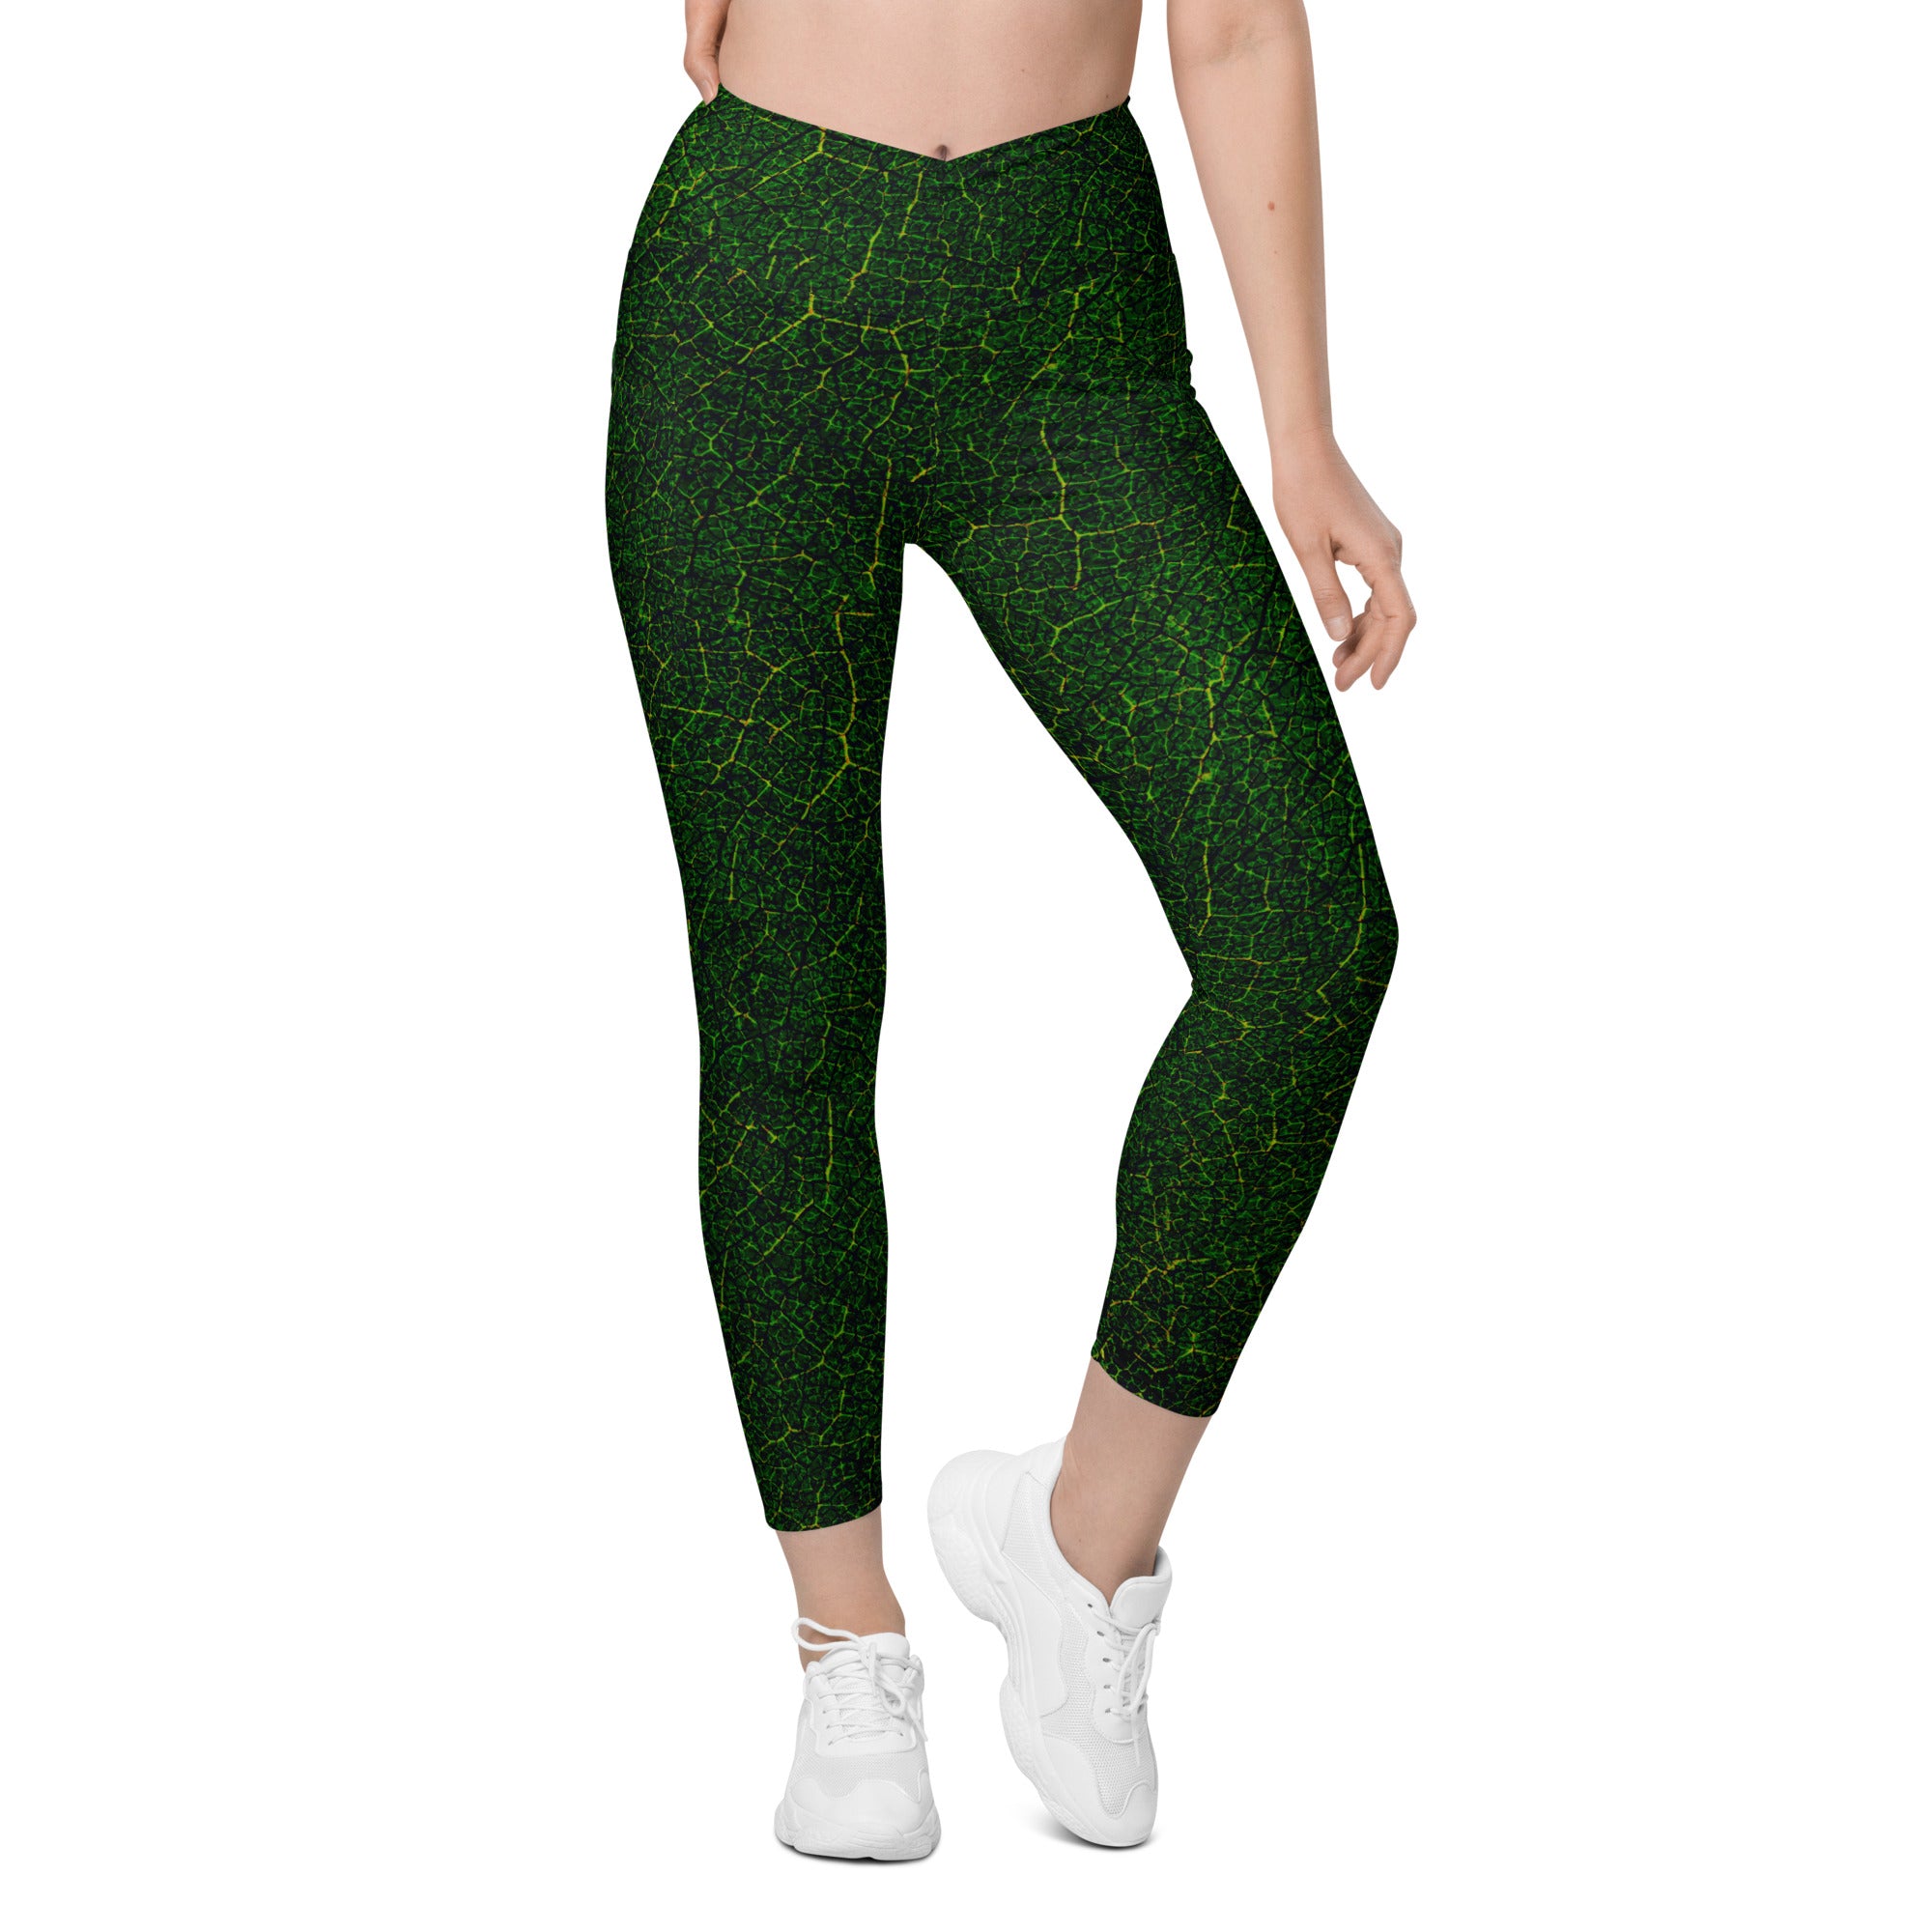 Fashionable outfit with Botanical Bliss Leggings for a casual day out, pairing them with a simple top to let the print shine.